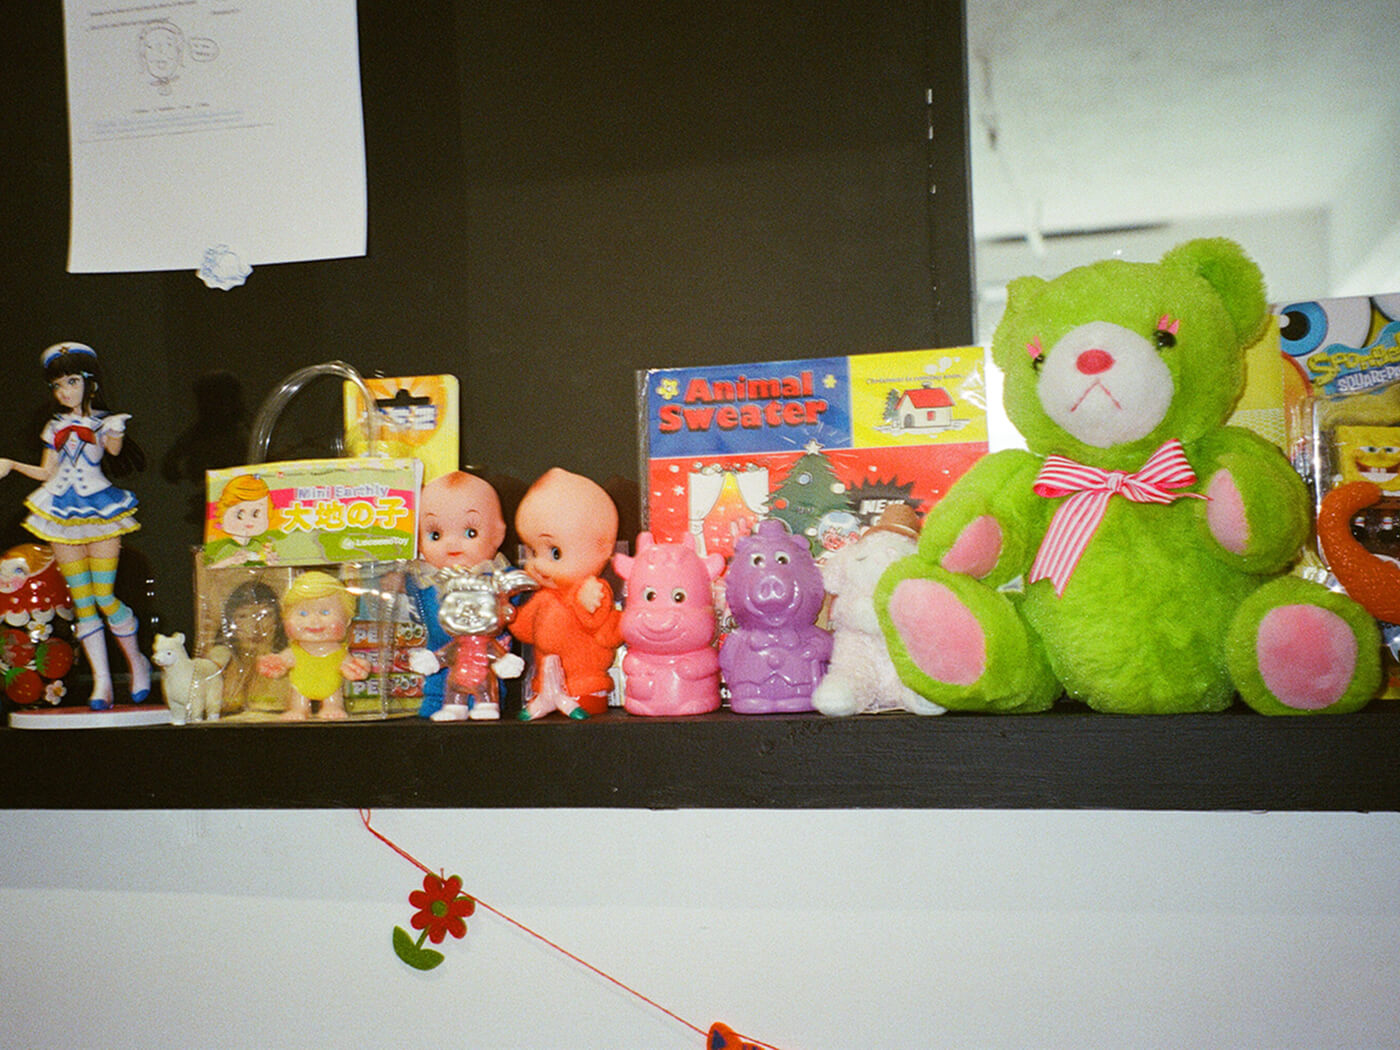 Toys and trinkets in Merry Lamb Lamb’s studio